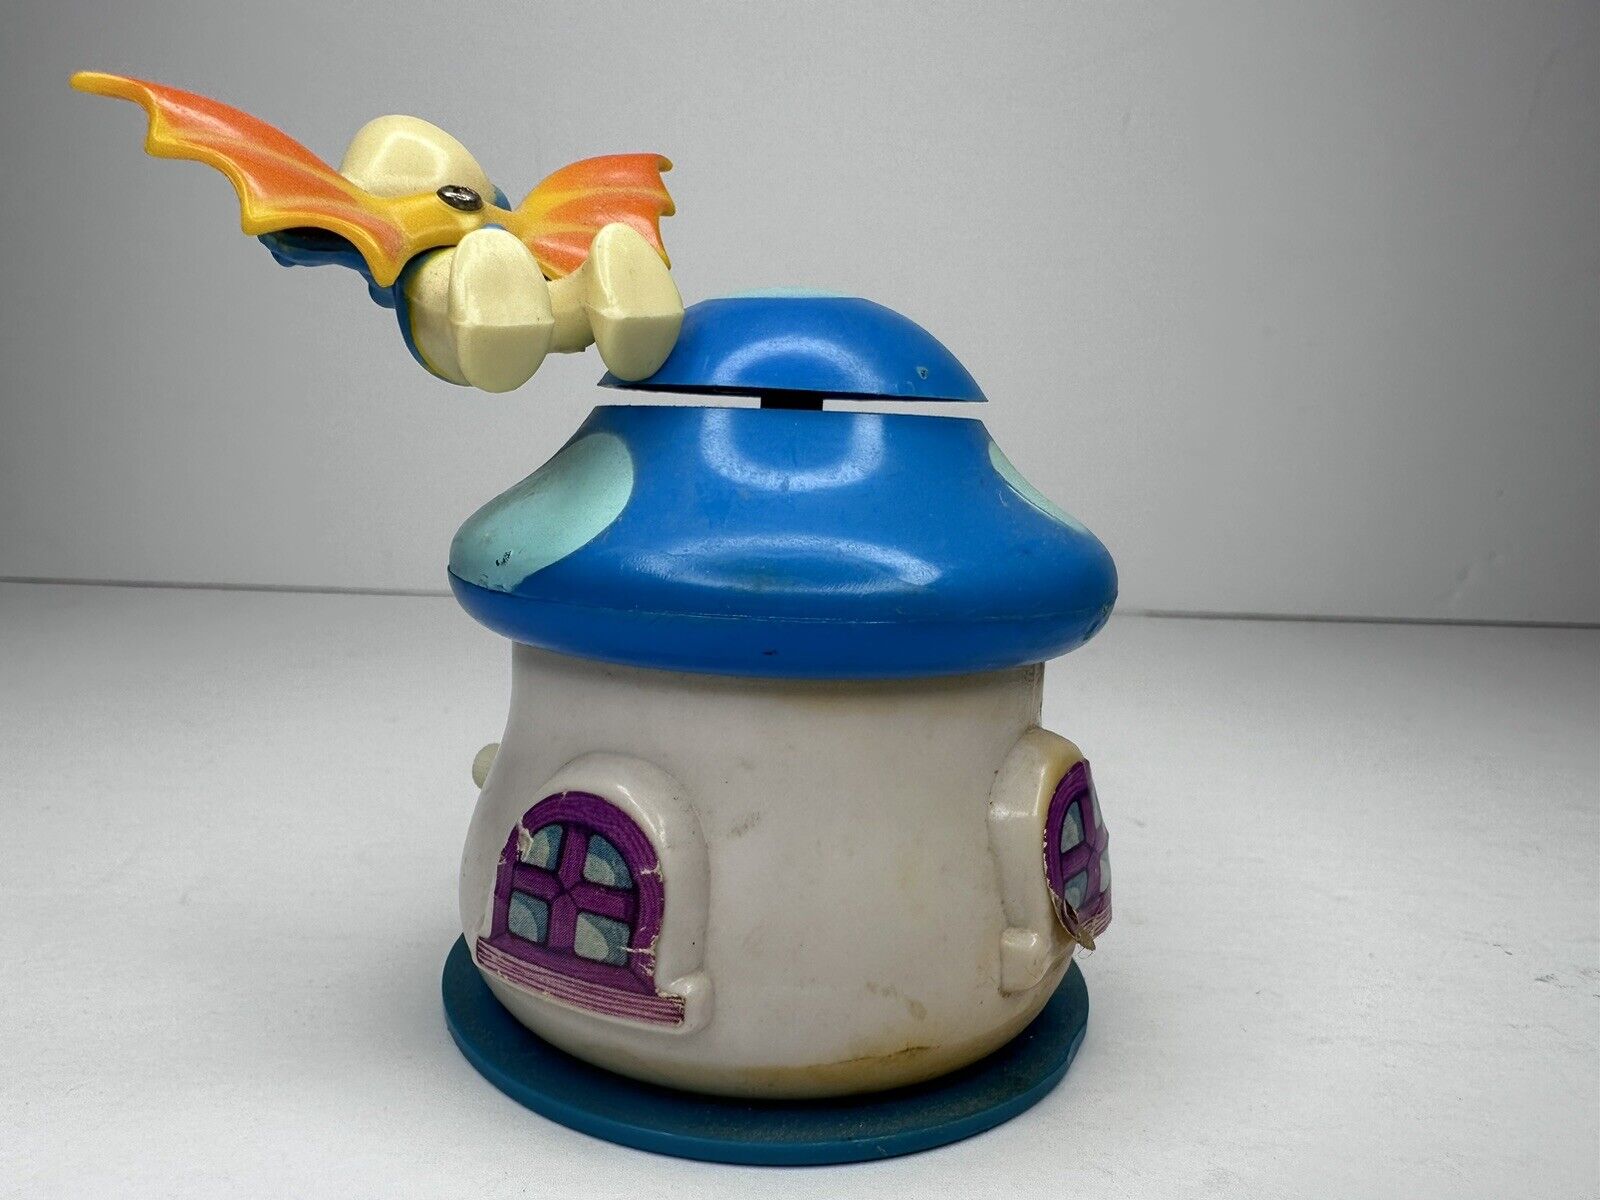 1982 Vintage Smurf Fun House Flying Vampire Wind-Up Toy - A Classic Collectible for Nostalgia Enthusiasts - TreasuTiques